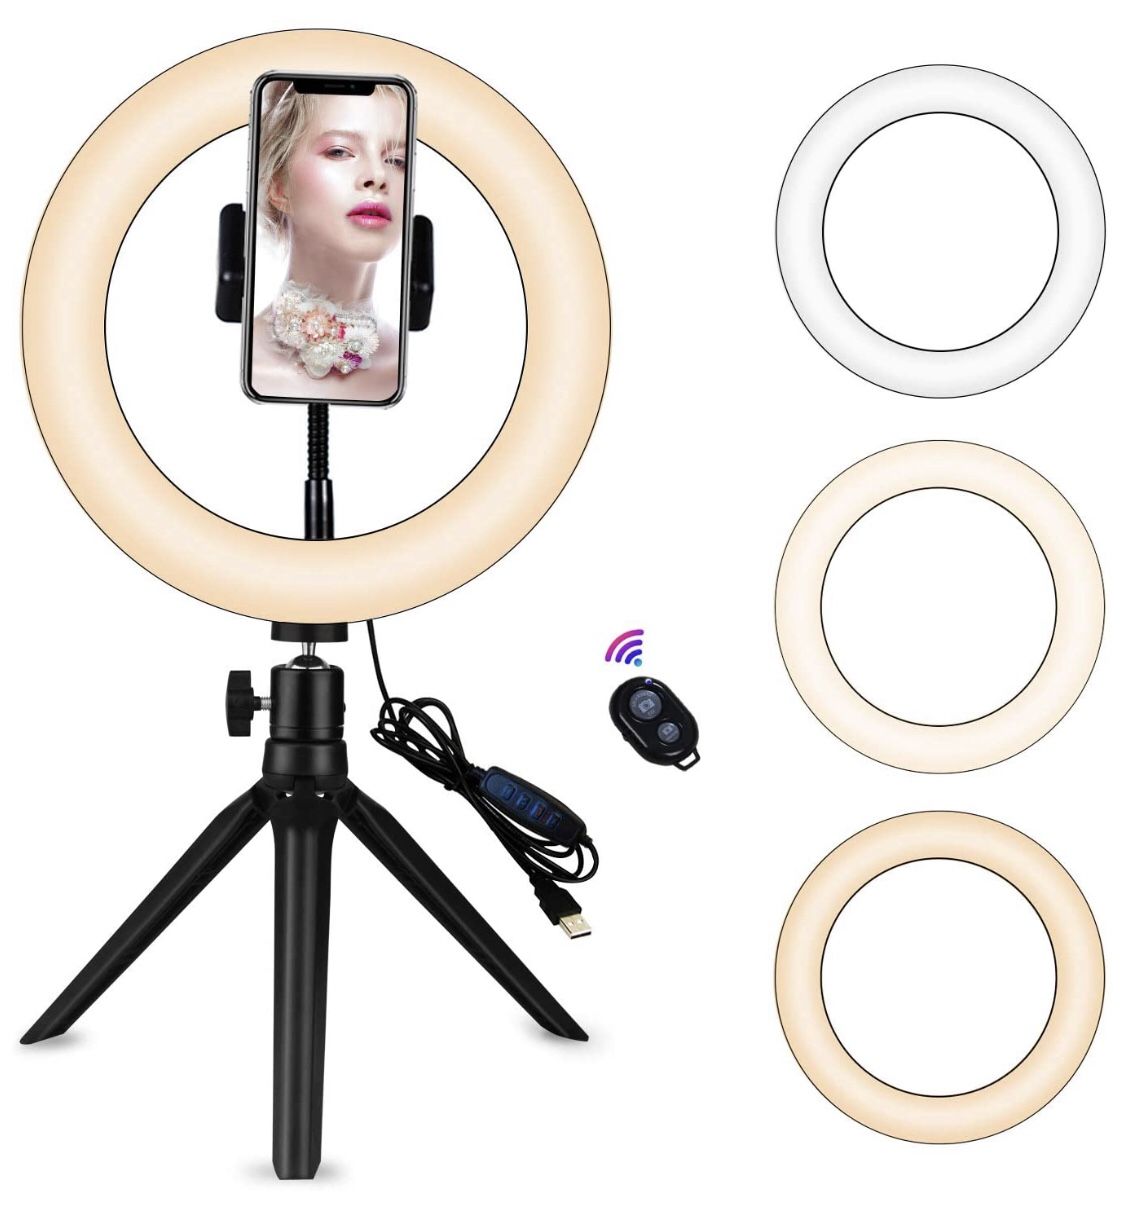 9" Portable Led Ring Light with Stand &Selfie Ring Light Cell Phone Holder and Remote Control for Live Streaming in YouTube, Facebook, Take Video,Mak